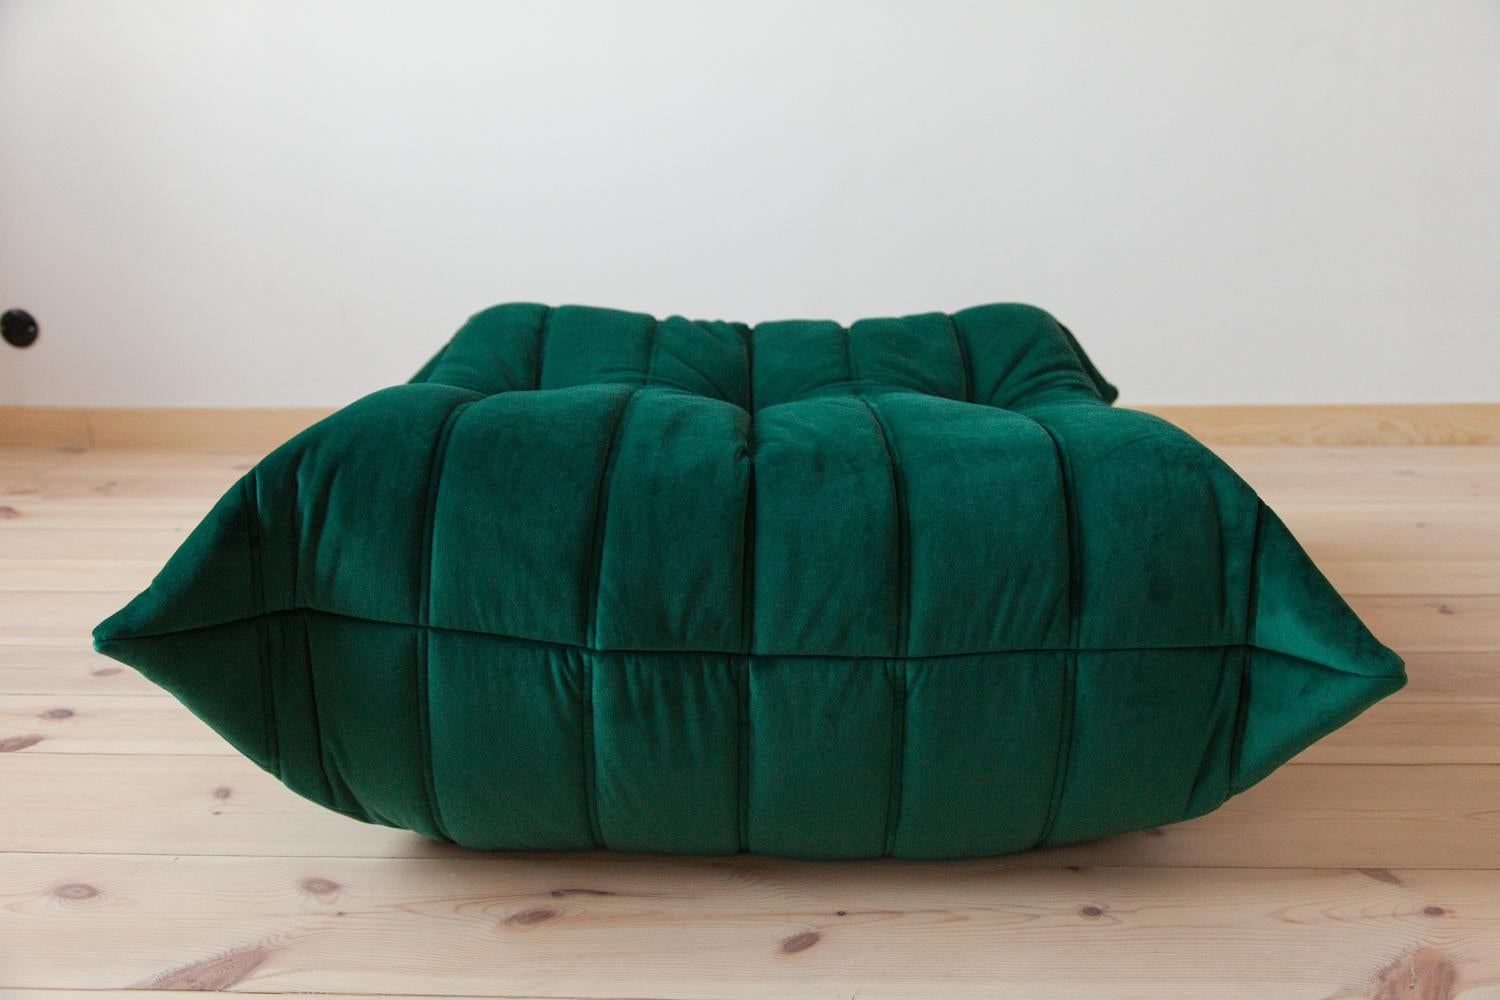 This Togo ottoman was designed by Michel Ducaroy in 1973 and was manufactured by Ligne Roset in France. It has been reupholstered in new bottle green velvet (87 x 80 x 38 cm). It has the original Ligne Roset logo and genuine Ligne Roset bottom.